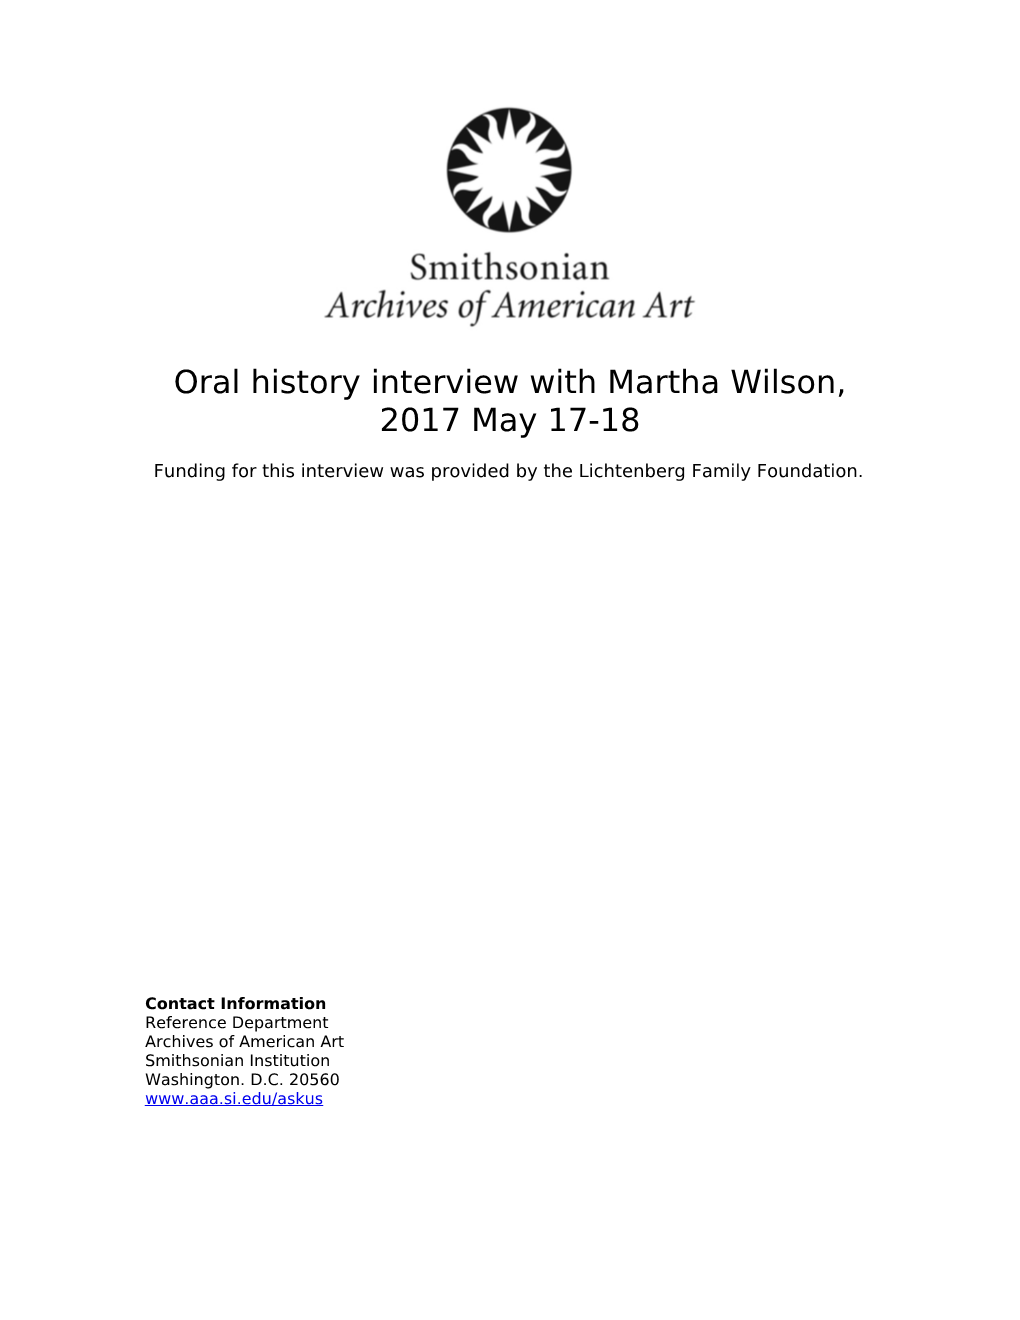 Oral History Interview with Martha Wilson, 2017 May 17-18